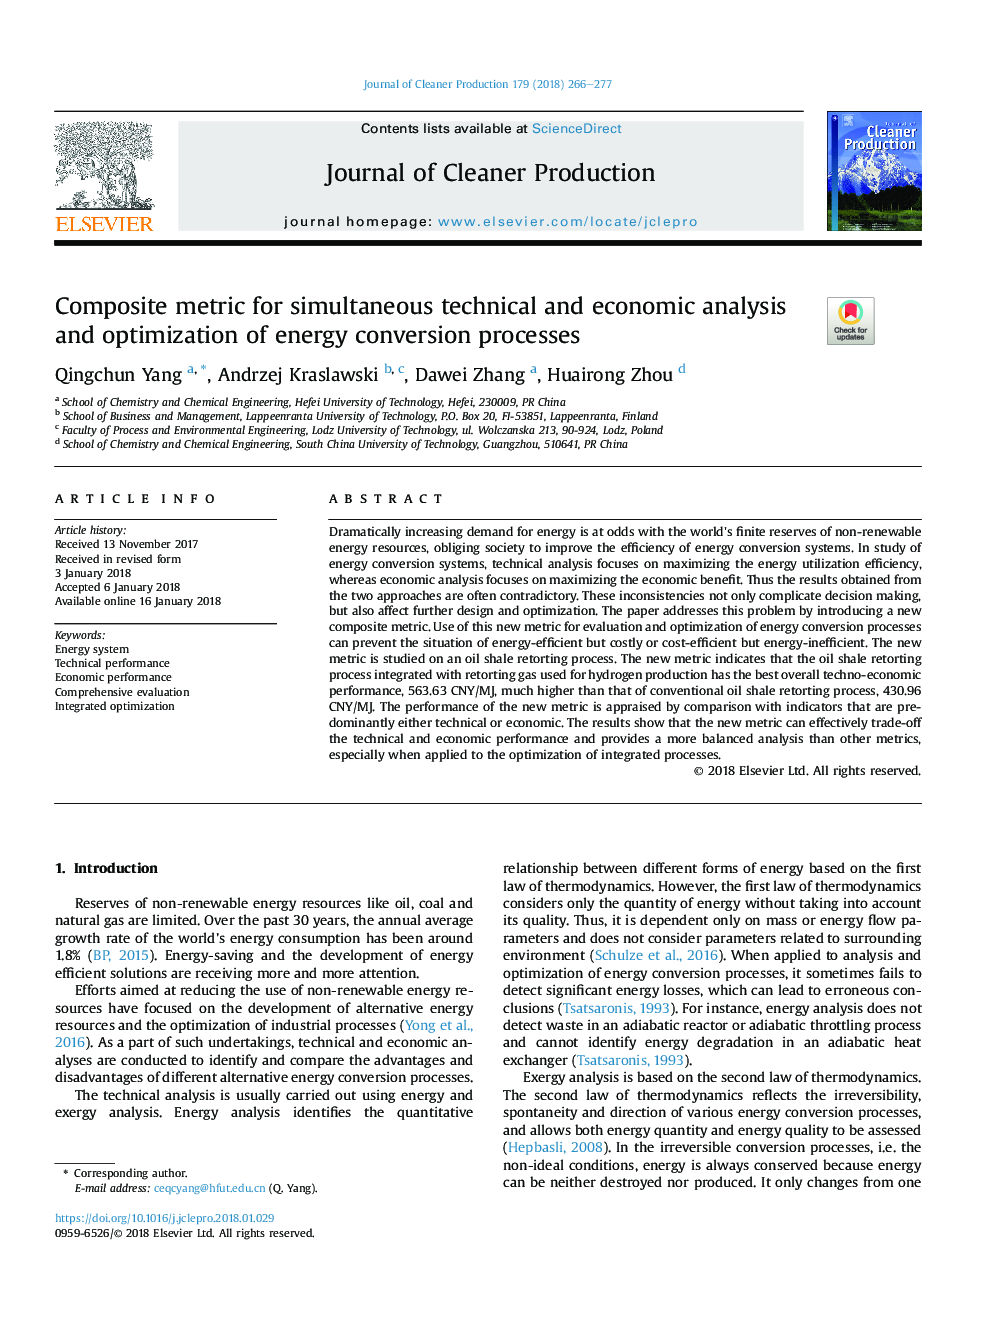 Composite metric for simultaneous technical and economic analysis and optimization of energy conversion processes